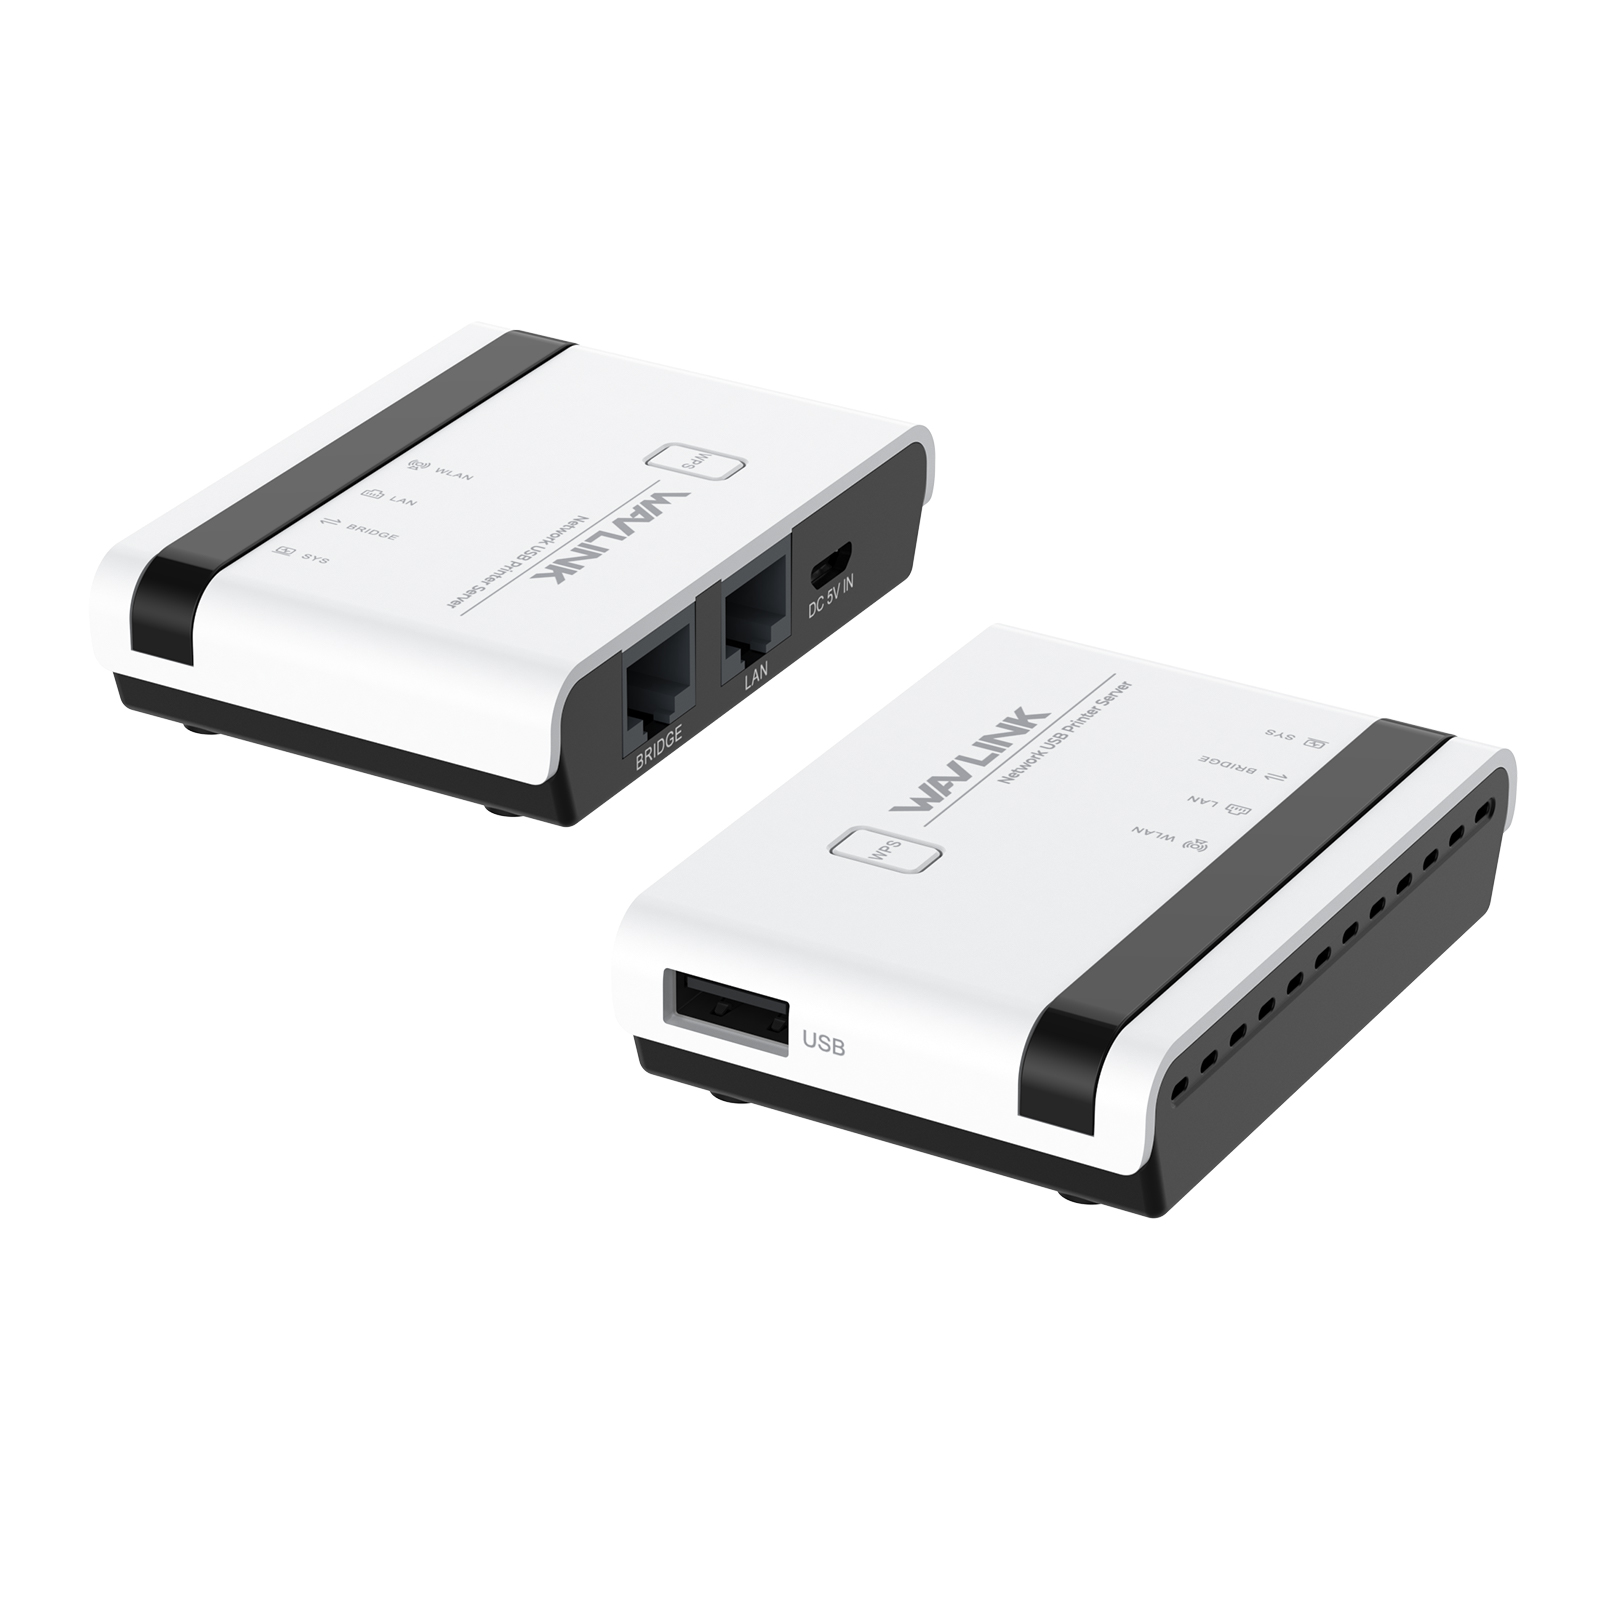 WAVLINK USB Wireless Print Server, WiFi Print Server with 10/100Mbps  LAN/Bridge, 480Mbps USB2.0, Support Wired/Wireless/Standalone Modes,  Compatible